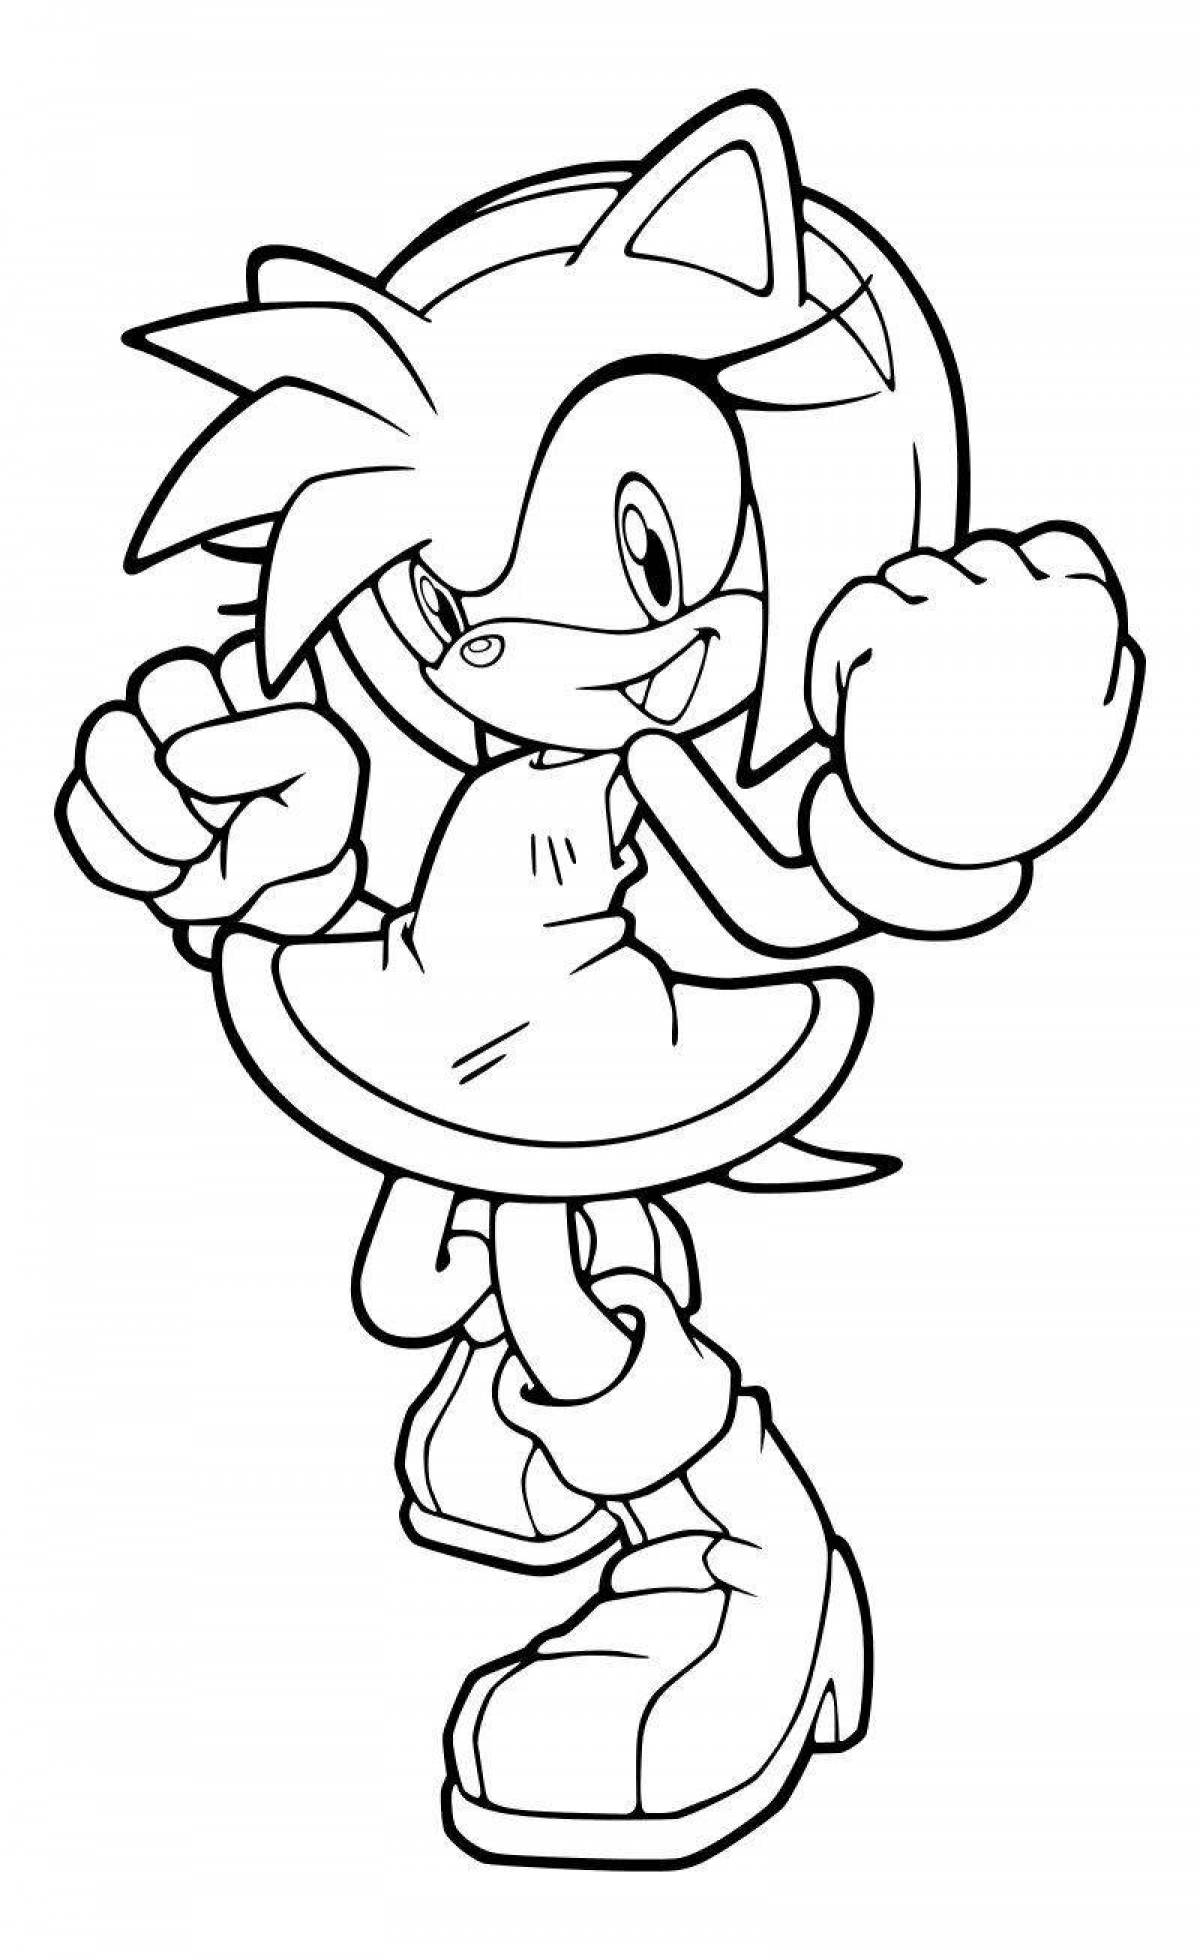 Exquisite sonic all heroes coloring book